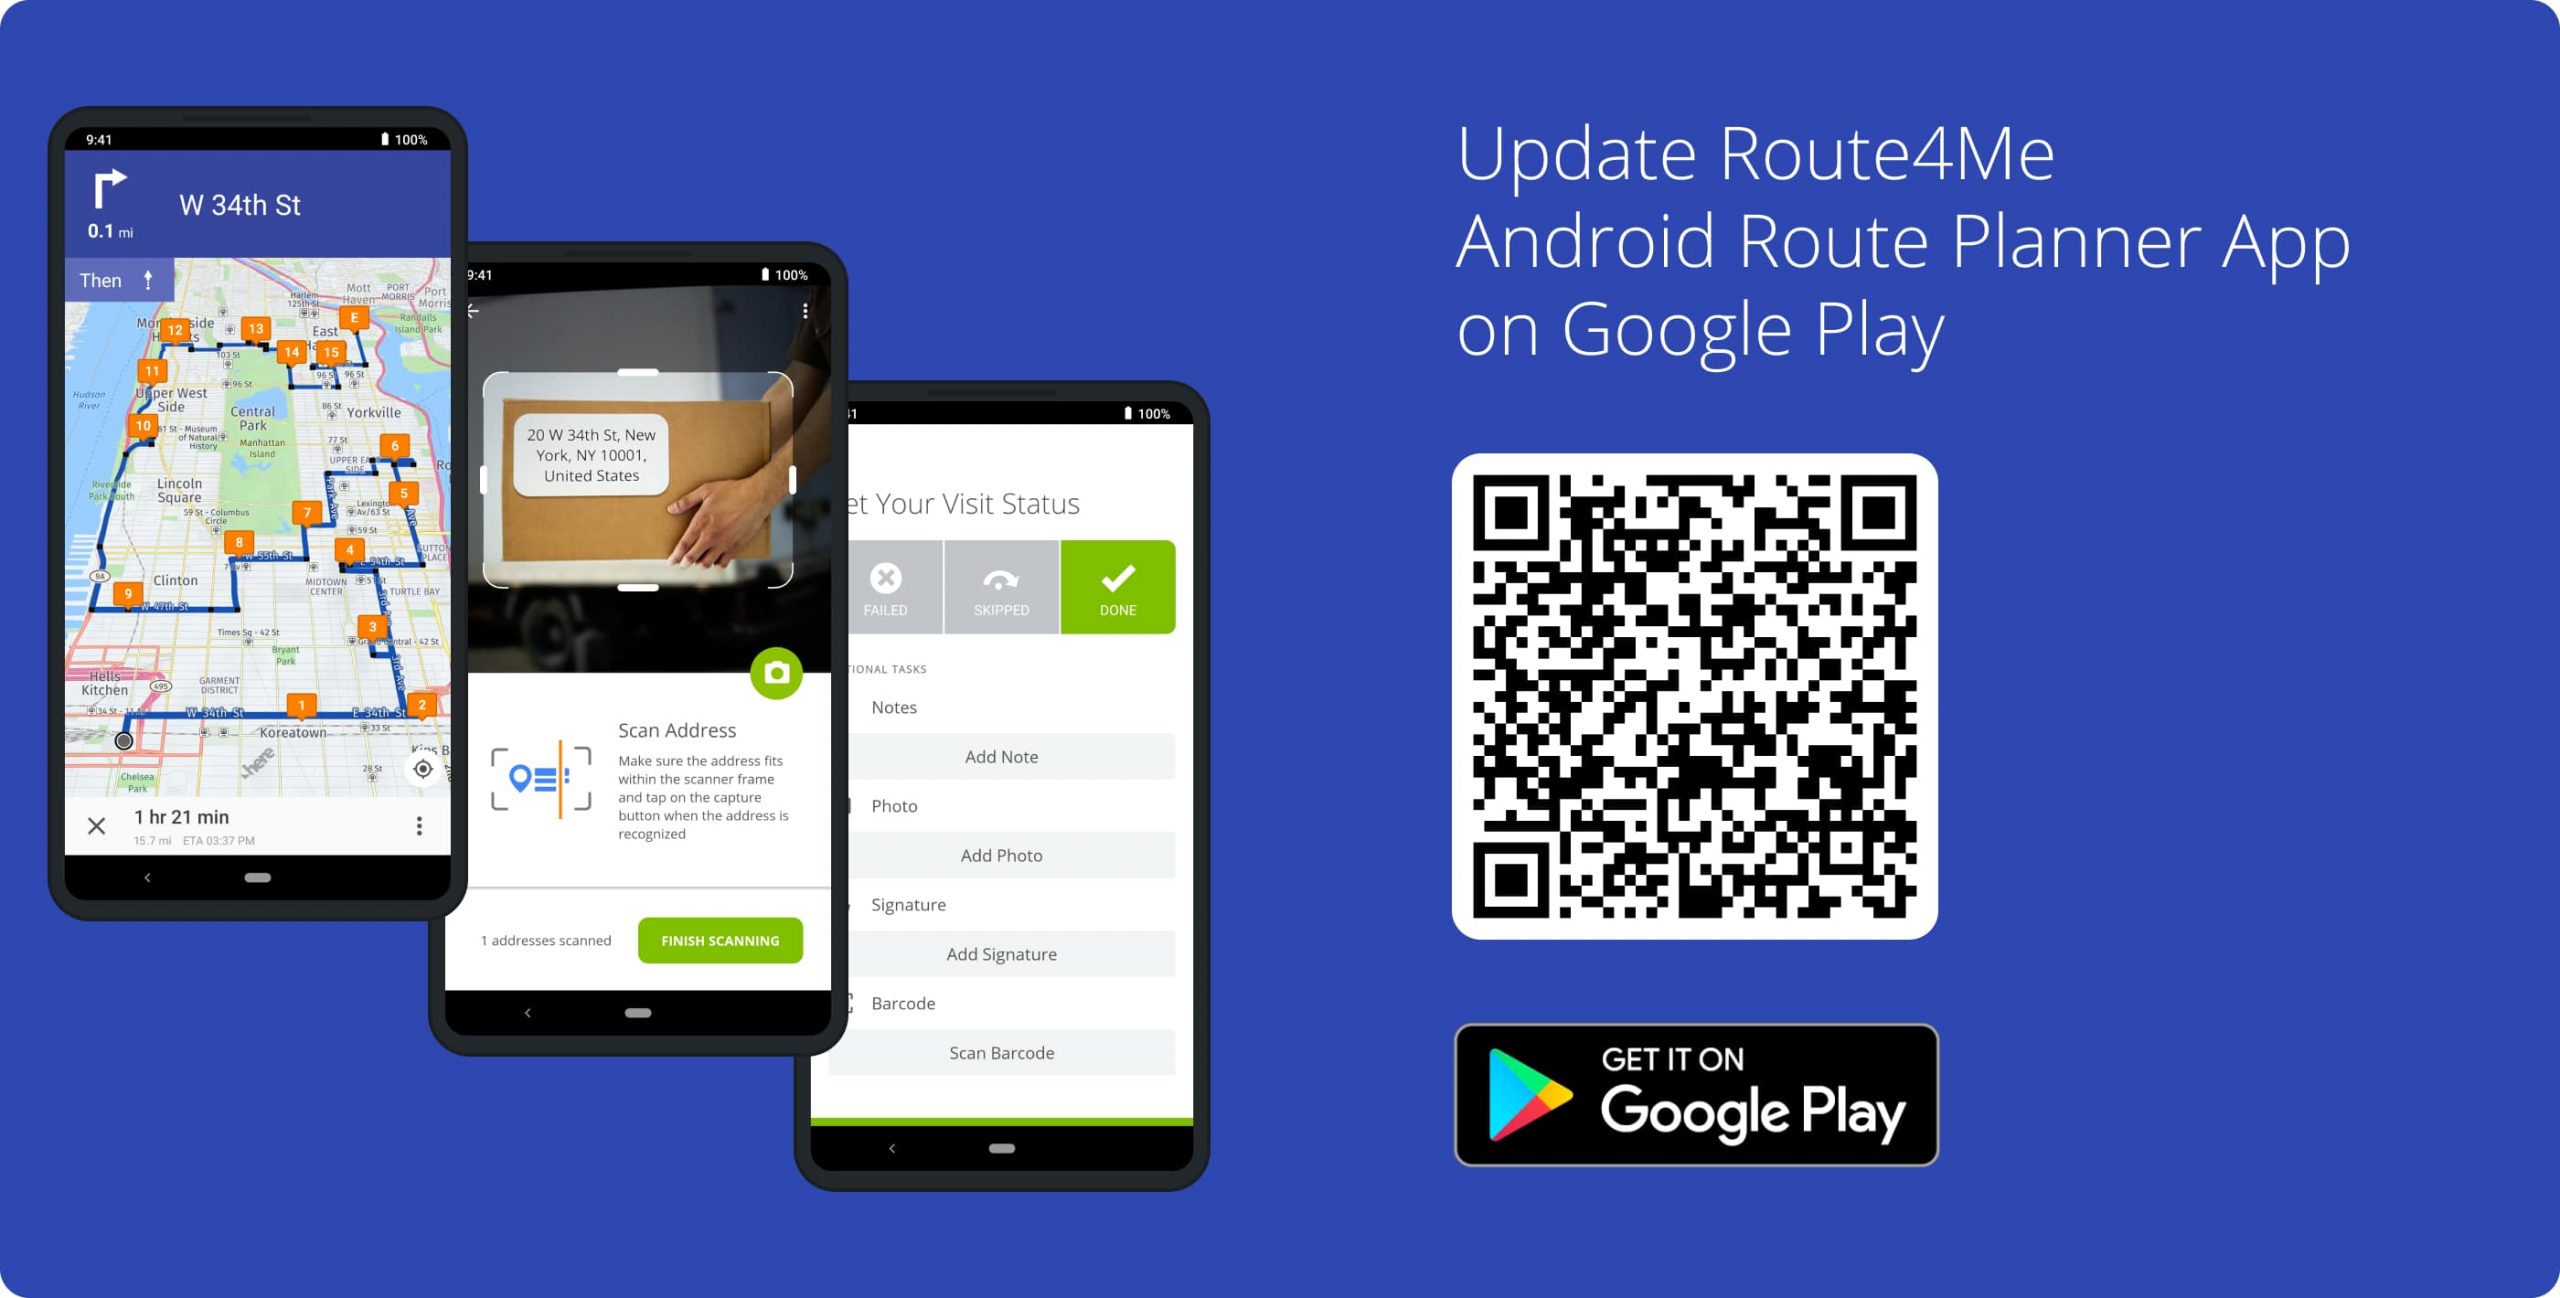 Update Route4Me's Android Route Planner app to get the latest features and released software updates.